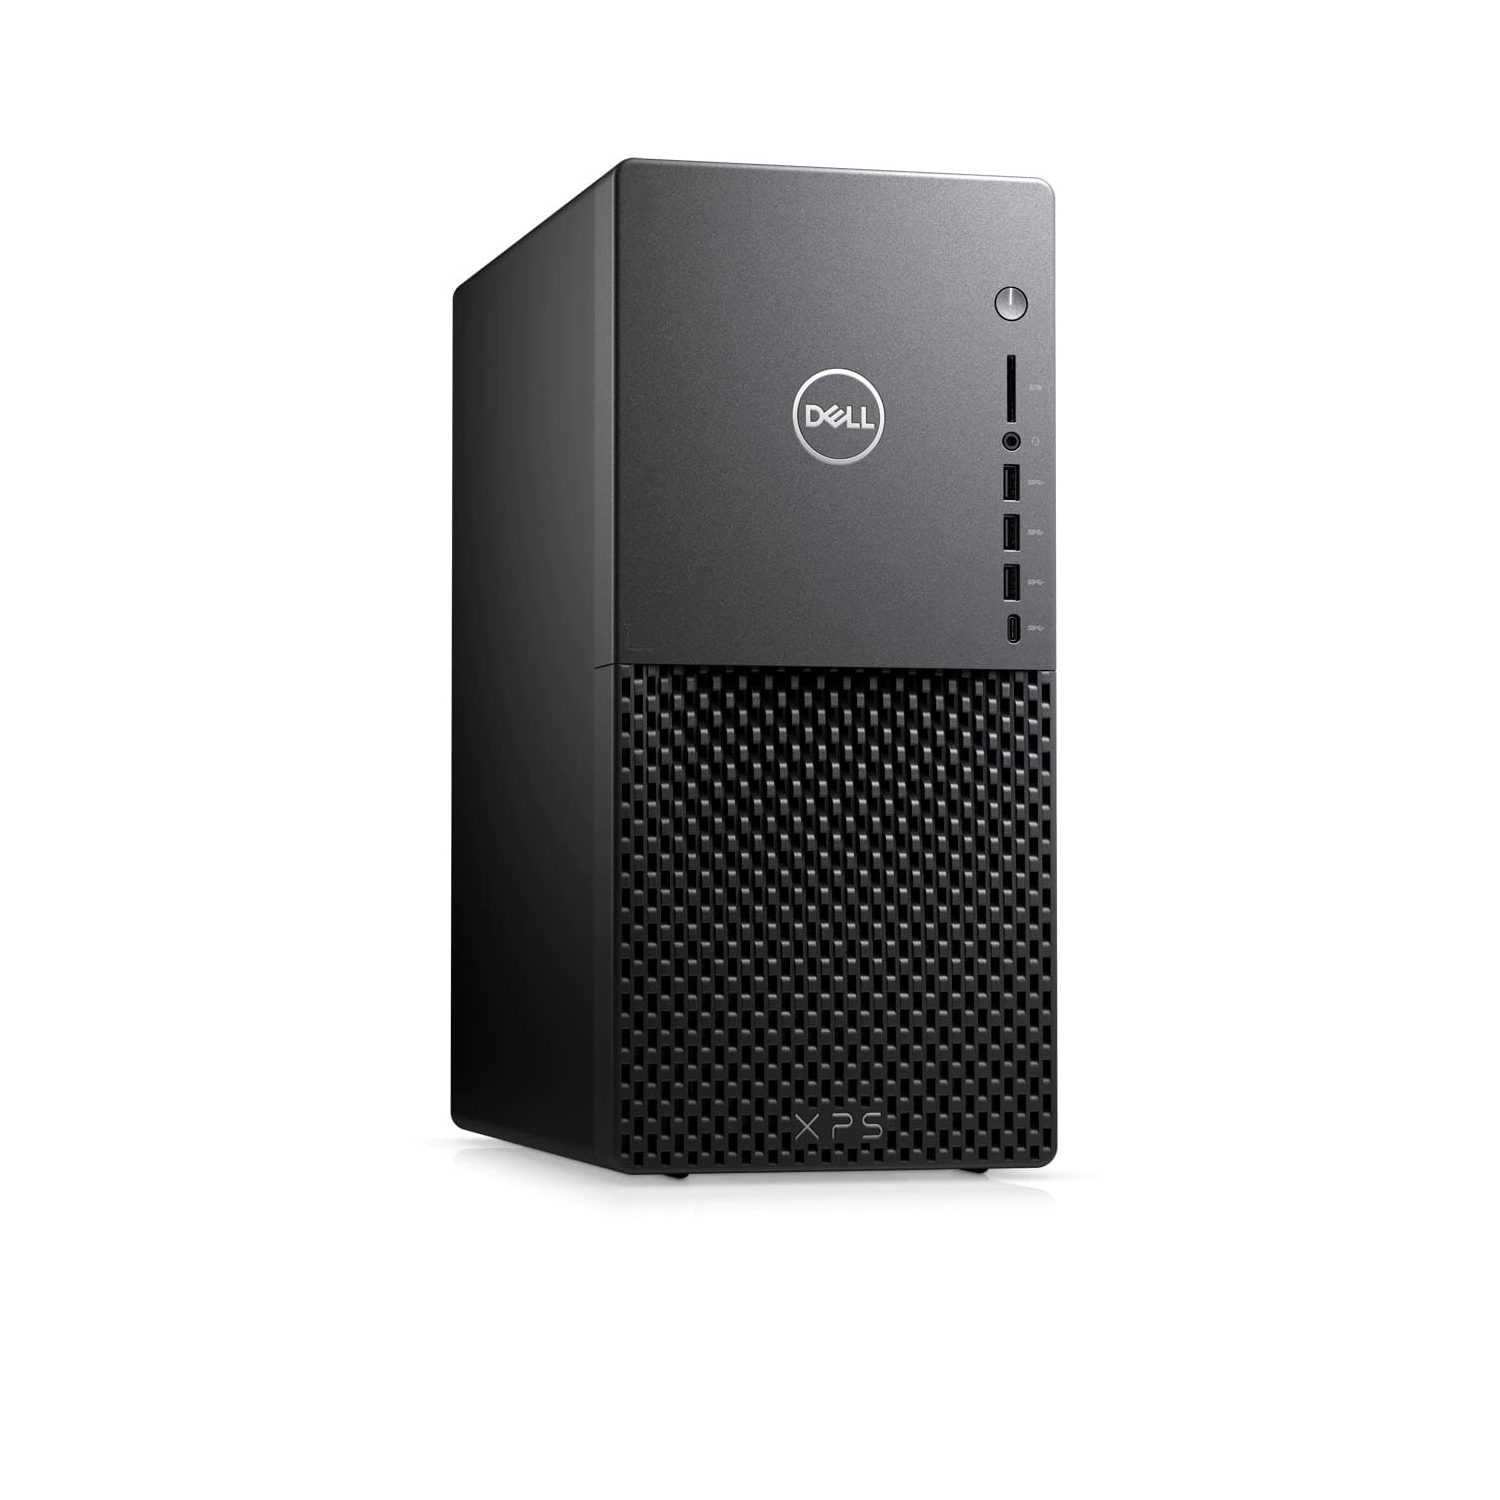 Refurbished (Excellent) - Dell XPS 8940 Desktop (2020) | Core i7 - 1TB HDD + 512GB SSD - 8GB RAM - RTX 3060 | 8 Cores @ 4.9 GHz - 11th Gen CPU Certified Refurbished